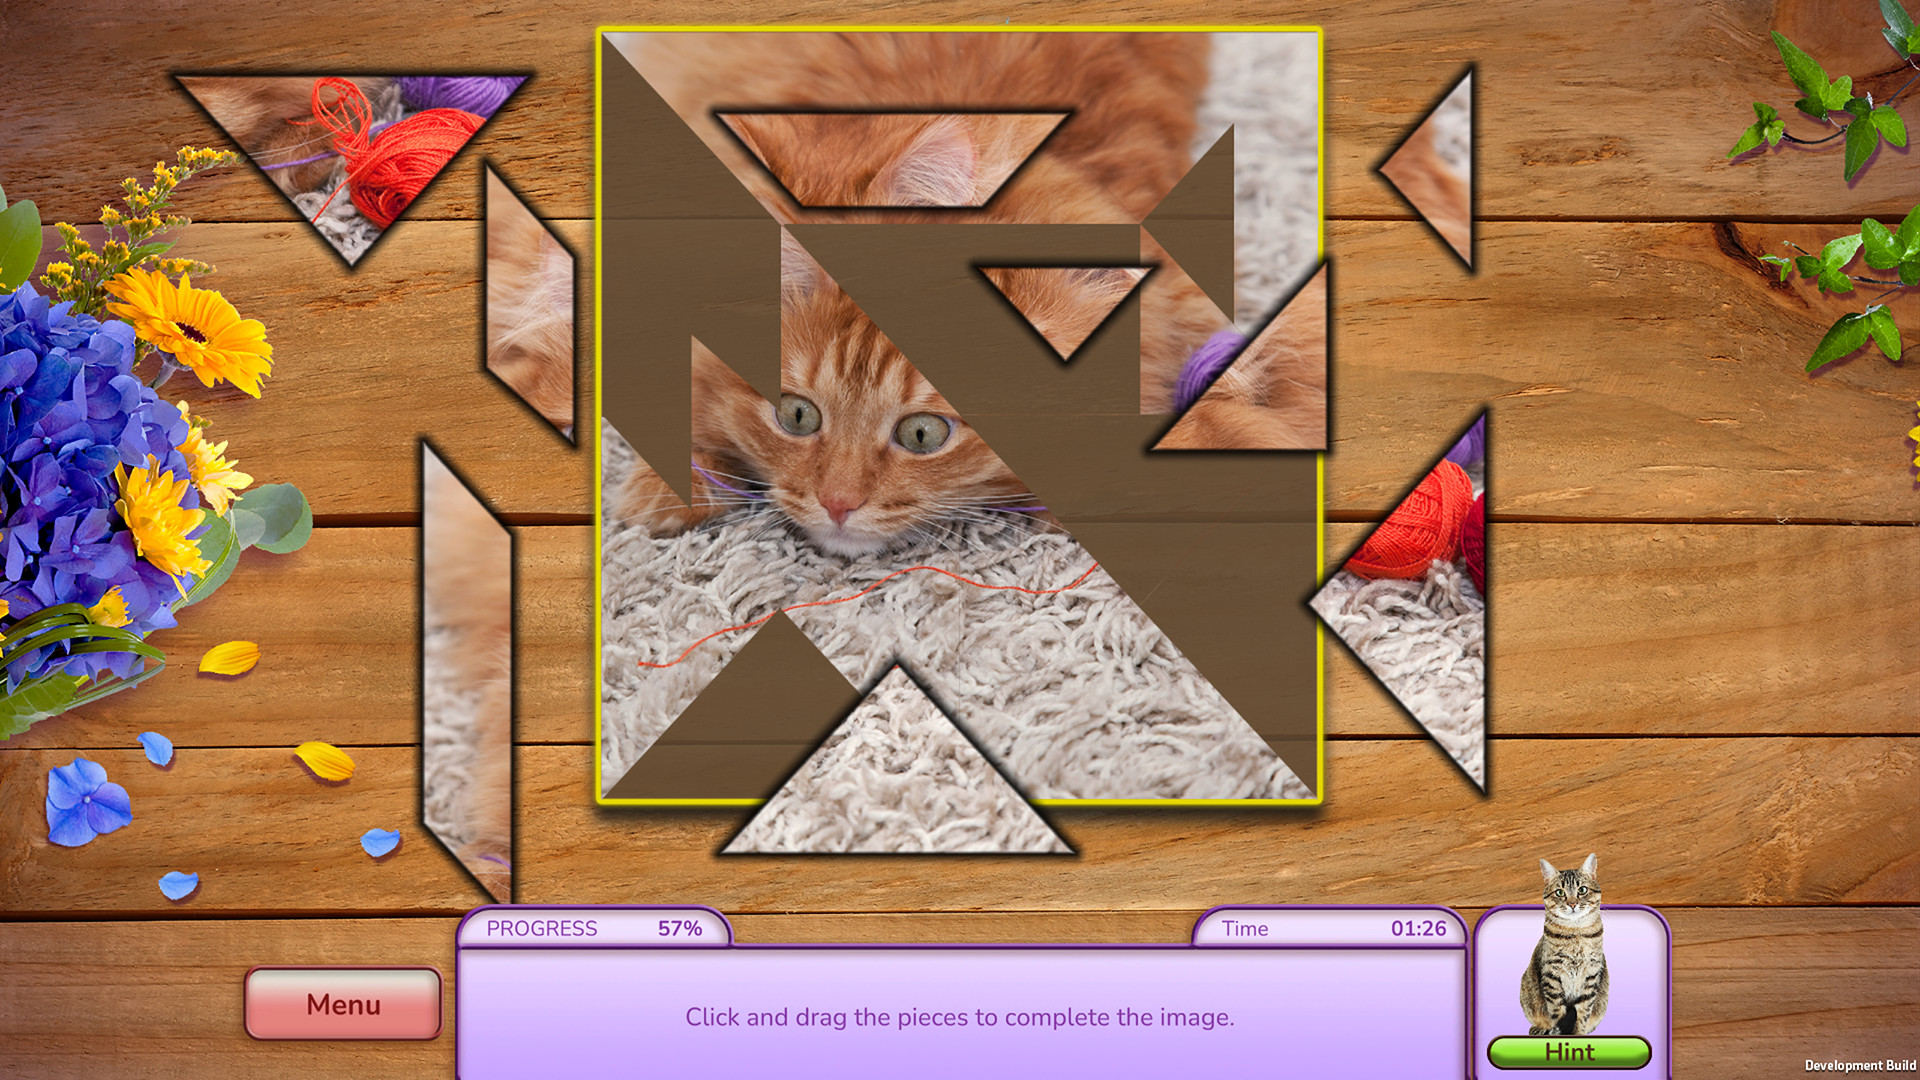 🕹️ Play Find The Cat Game: Free Online 8-Bit Cats Hidden Object